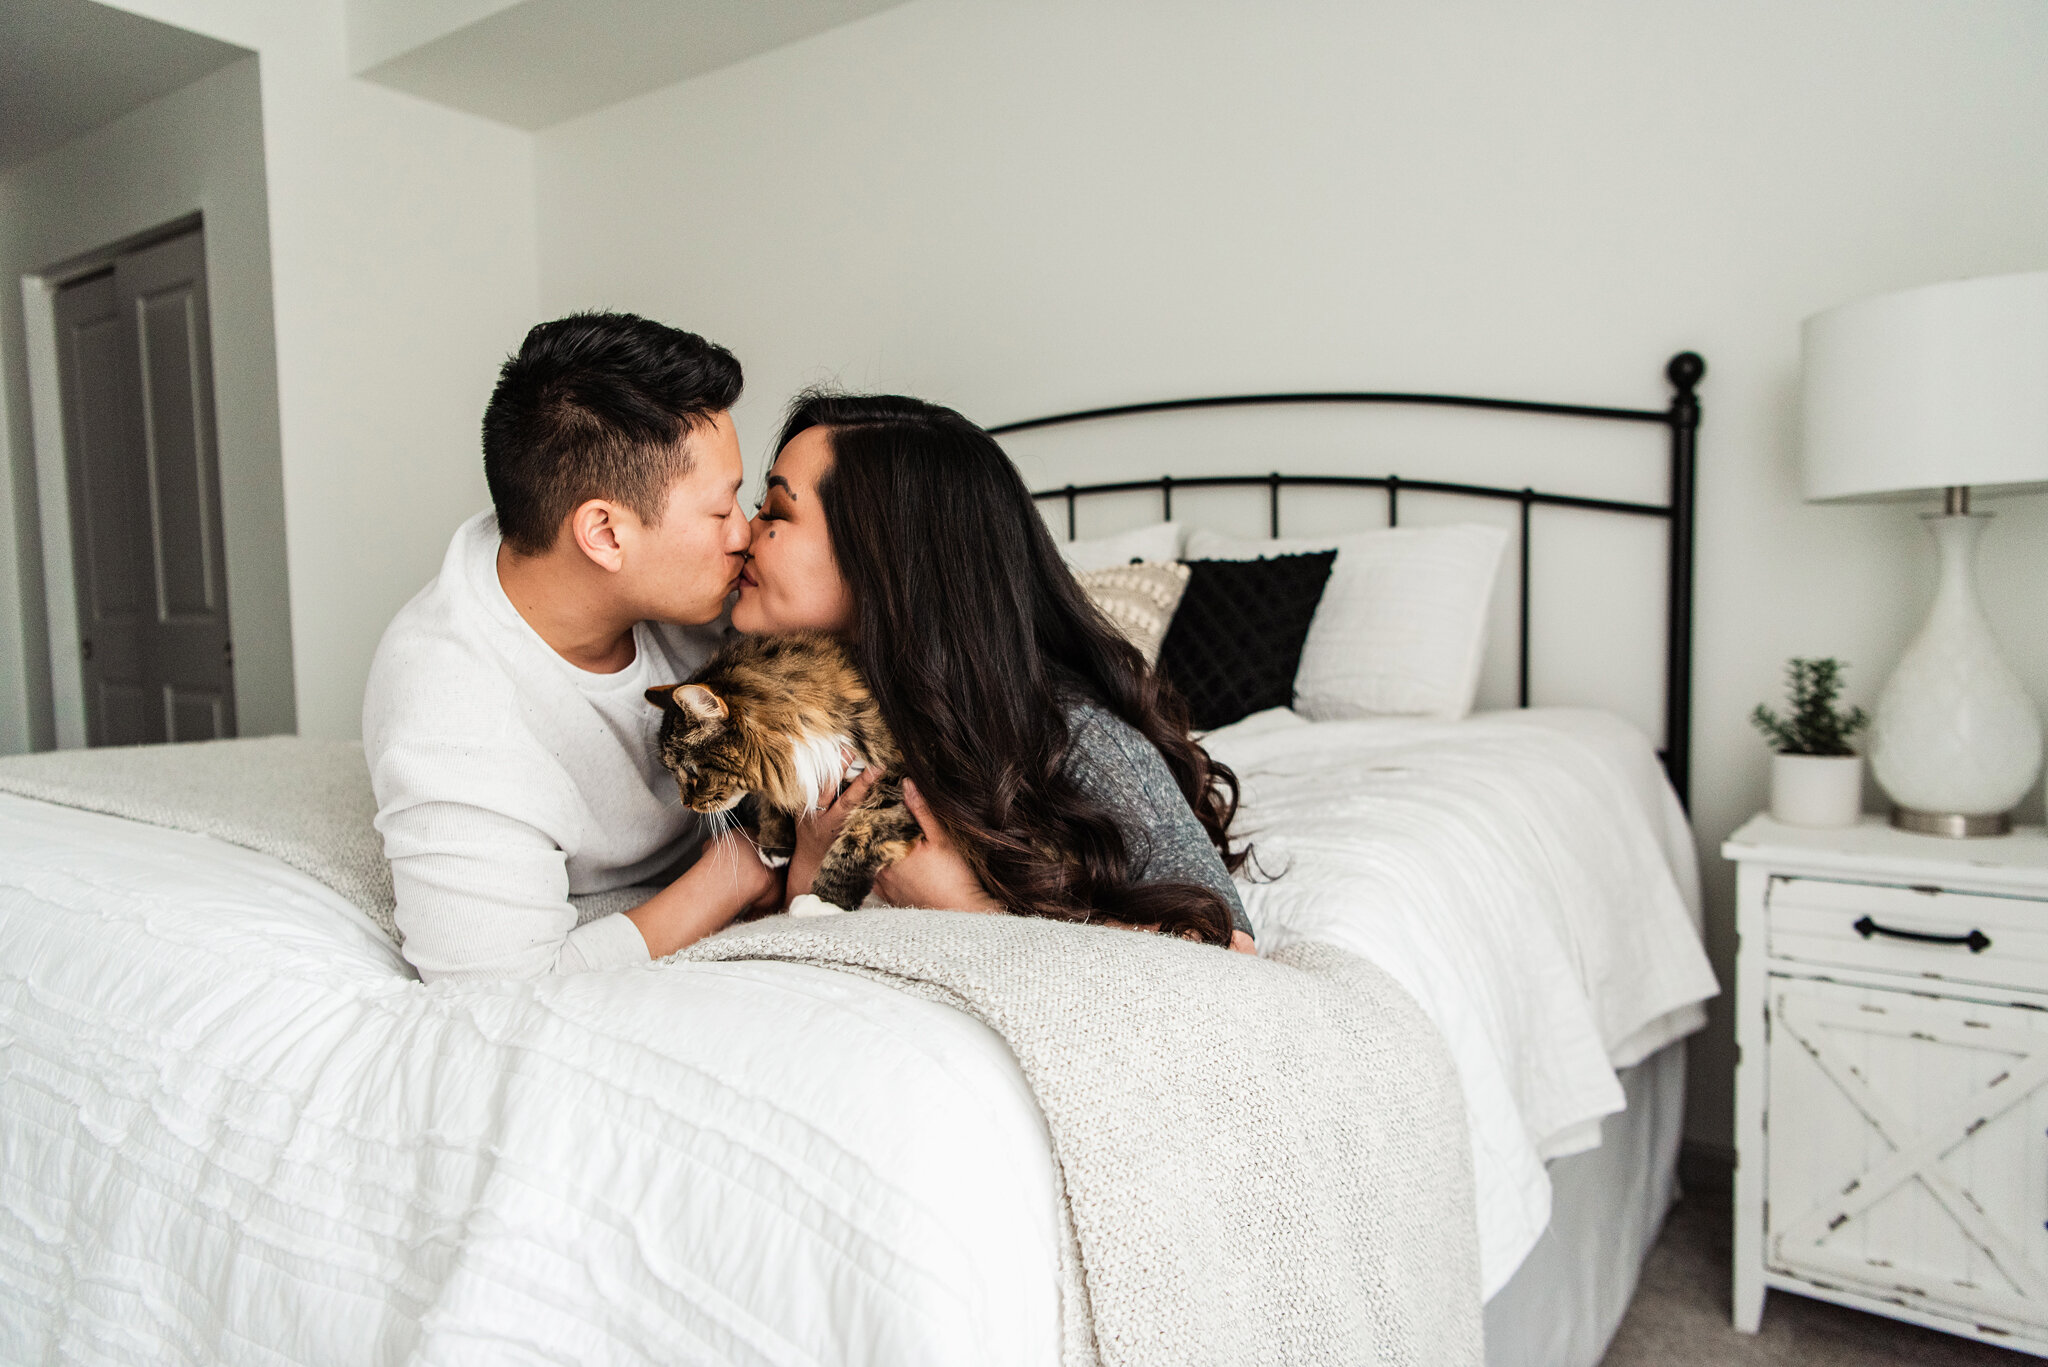 In_Home_Rochester_Couples_Session_JILL_STUDIO_Rochester_NY_Photographer_4383.jpg